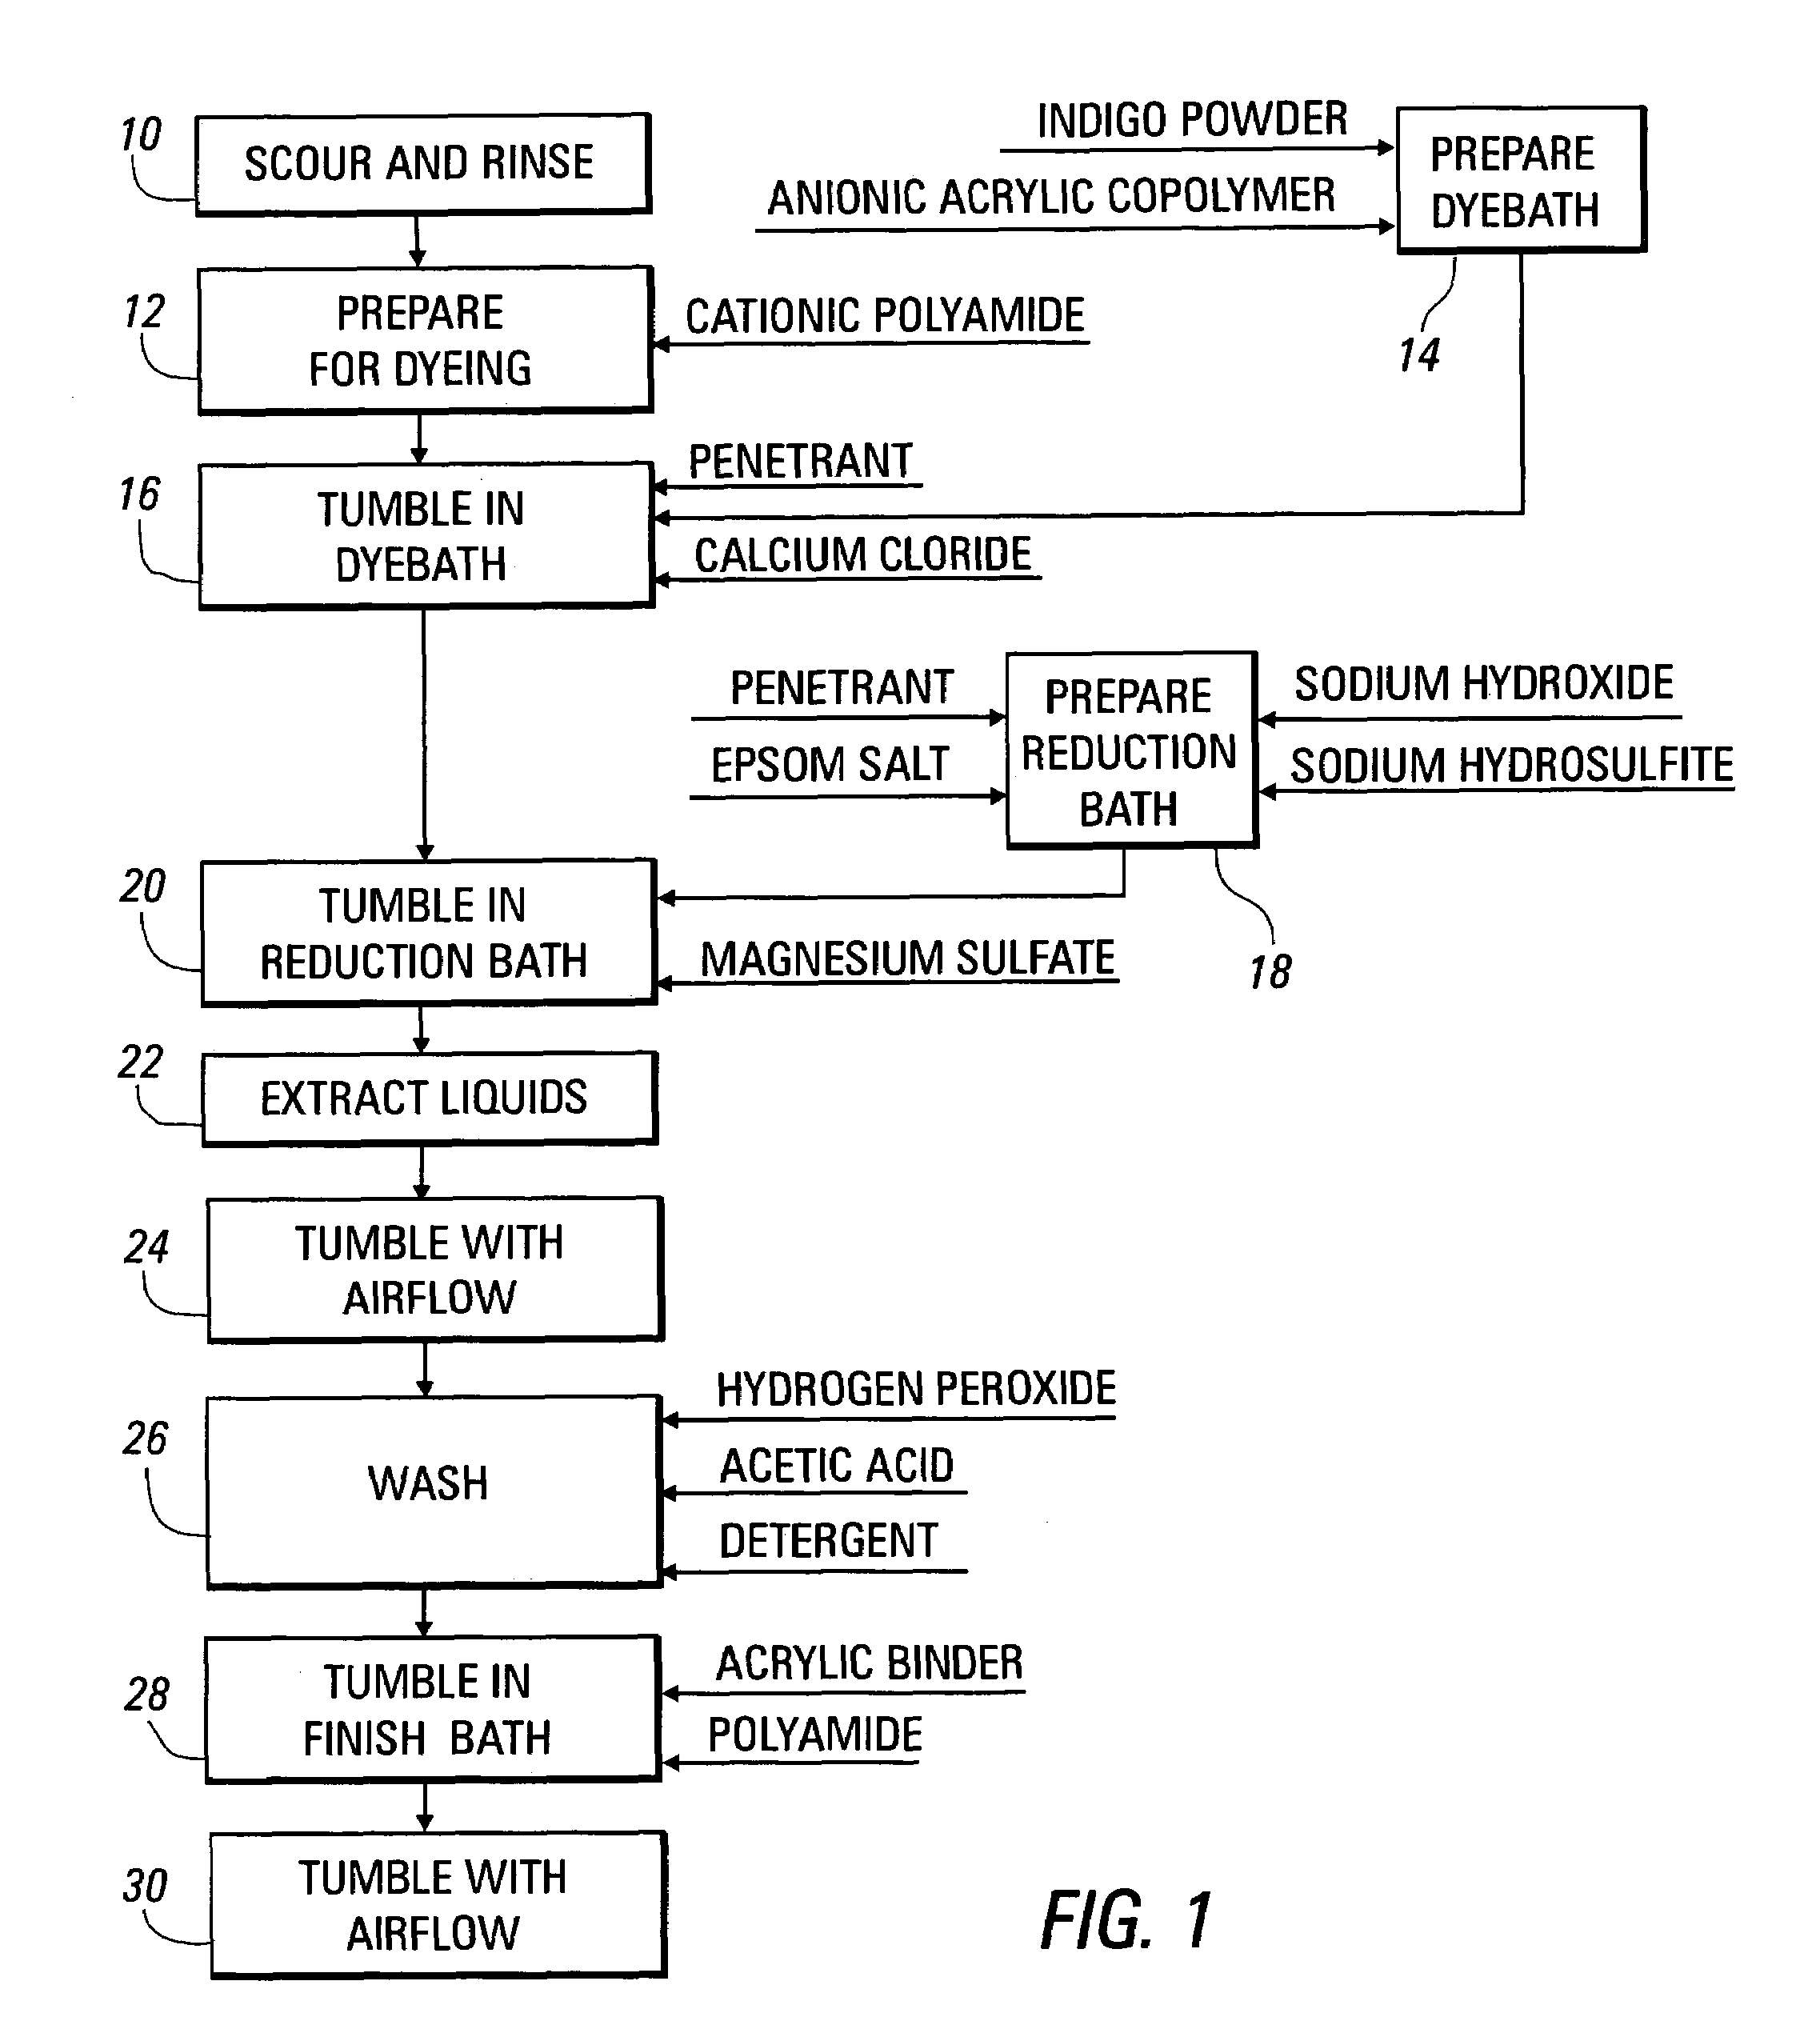 Method for dyeing fabric materials with indigo, other vat dyes, and sulfur dyes